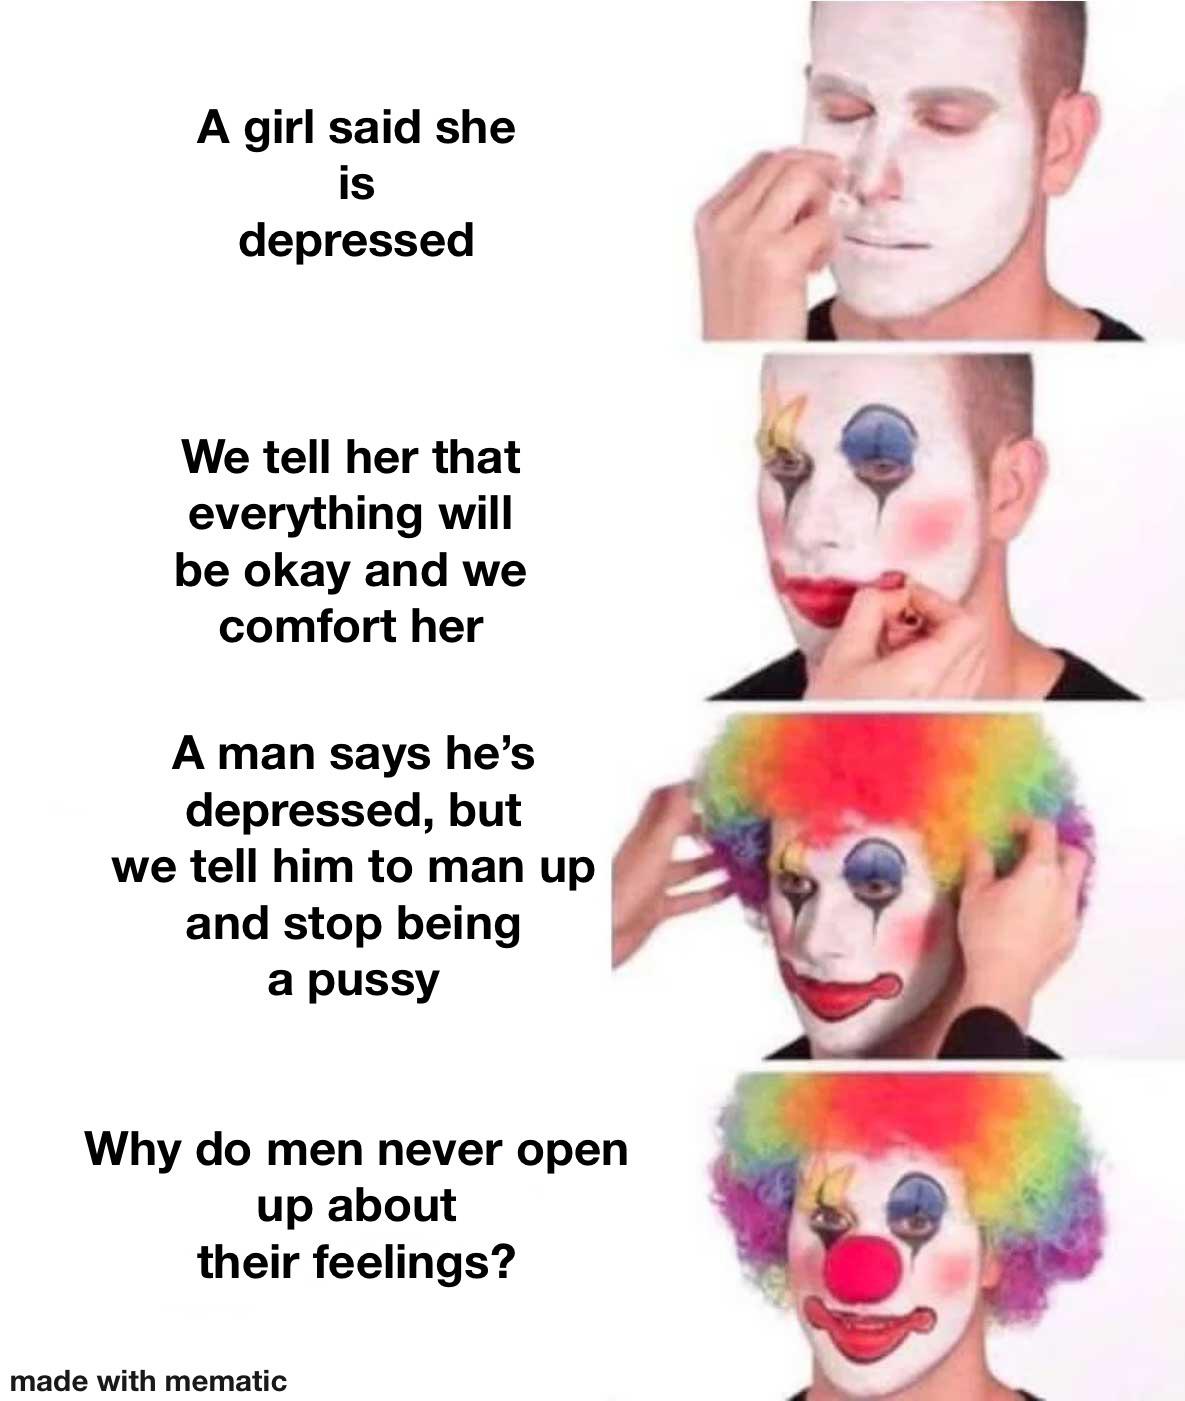 clown mode - A girl said she is depressed We tell her that everything will be okay and we comfort her A man says he's depressed, but we tell him to man up and stop being a pussy Why do men never open up about their feelings? made with mematic